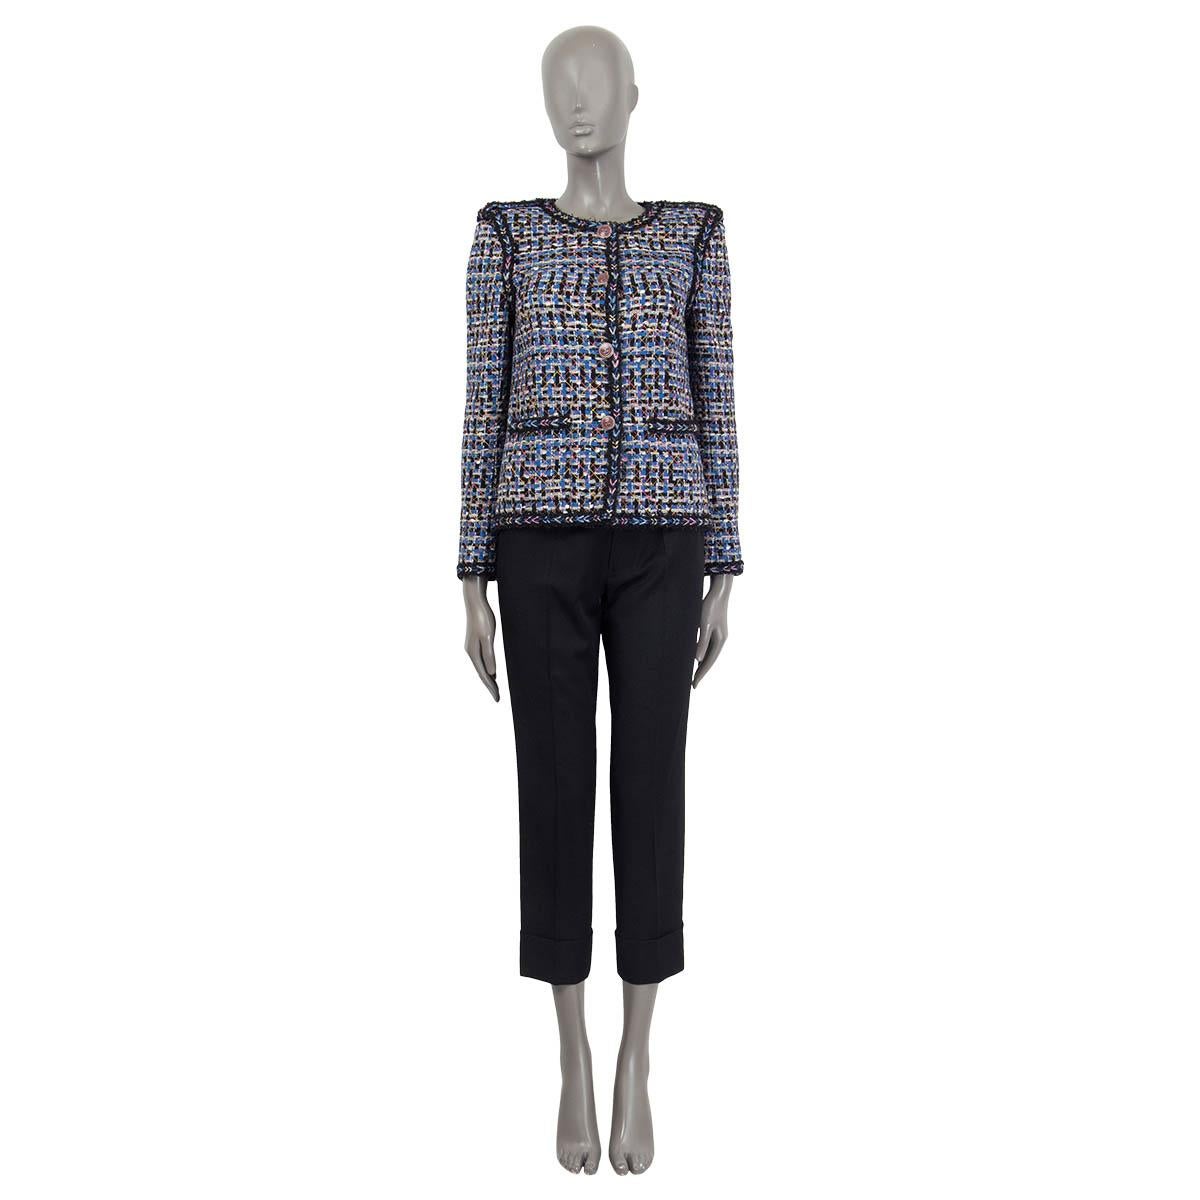 100% authentic Chanel 2016 collarless tweed jacket in blue, midnight blue, yellow, pink and white cotton (63%), nylon (27%), acrylic (4%), rayon (3%), wool (2%) and silk (1%). Features buttoned epaulettes at the shoulders and buttoned cuffs. Has